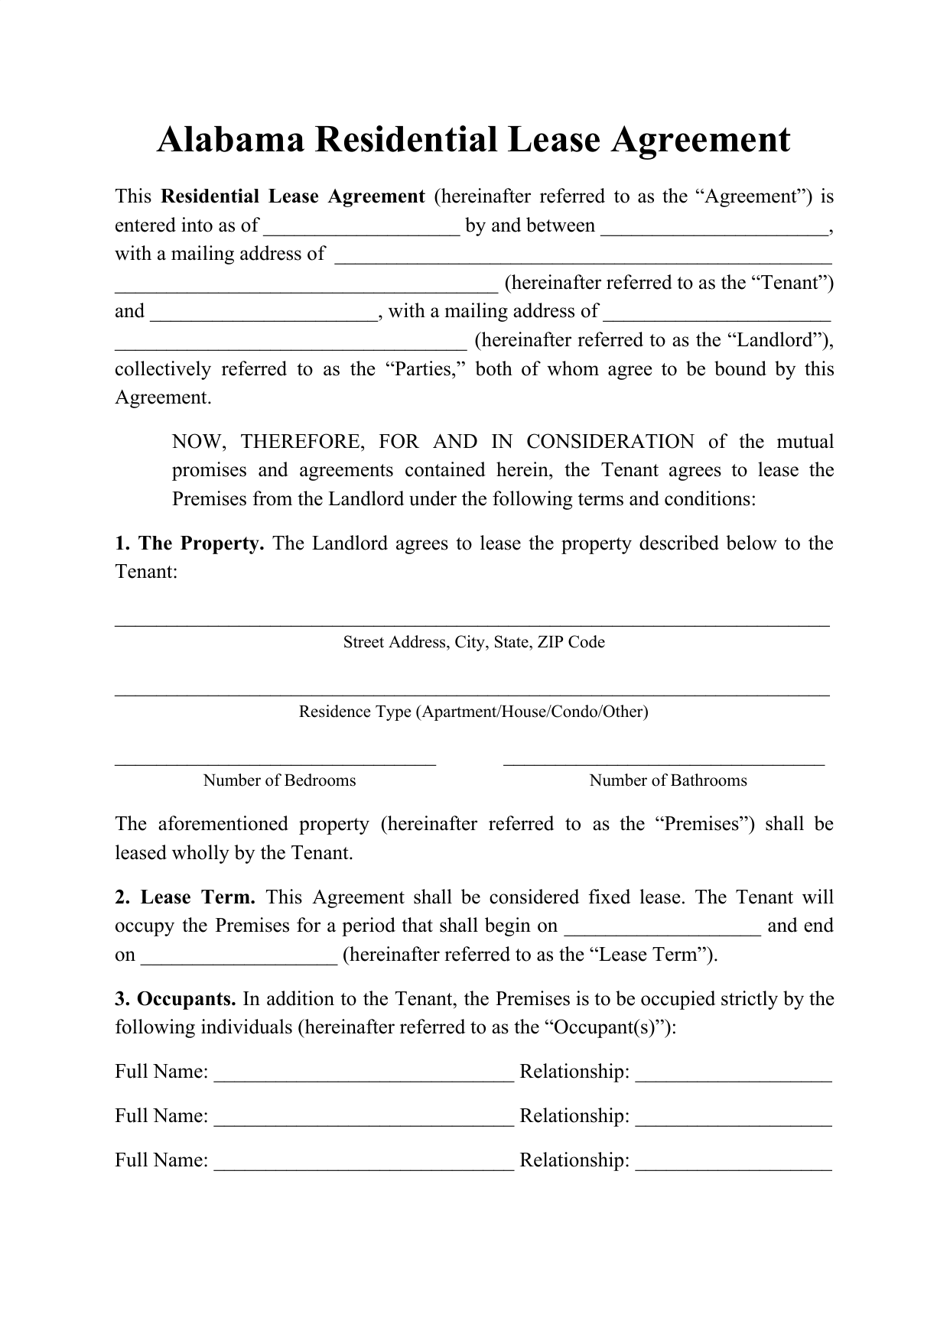 alabama residential lease agreement template download printable pdf templateroller